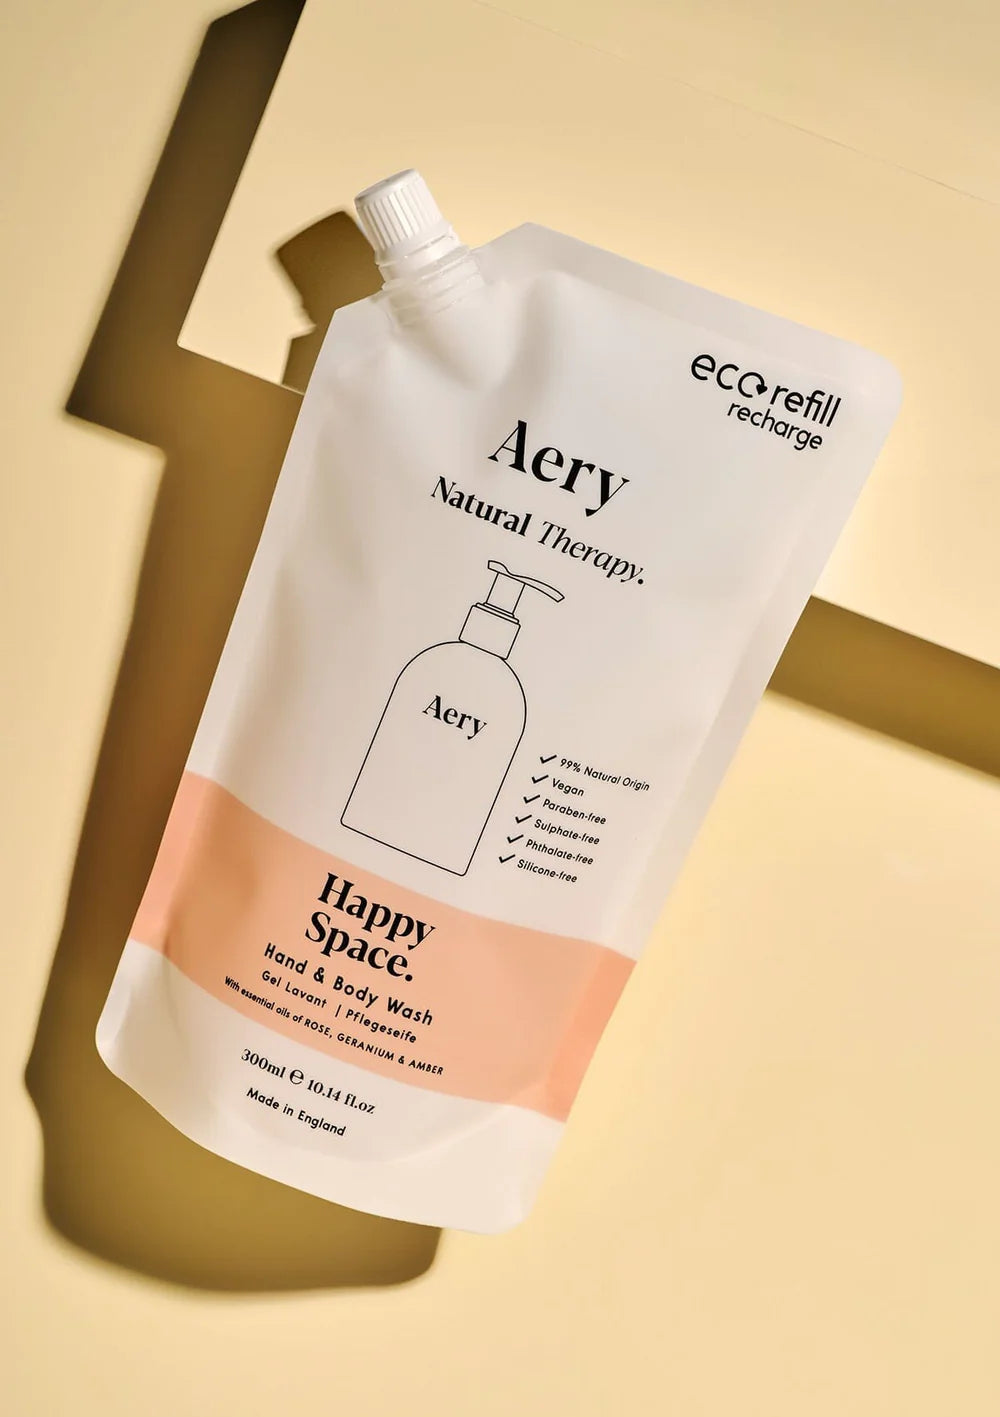 Aery Happy Space Hand & Body Wash Refill - Rose Geranium and Amber